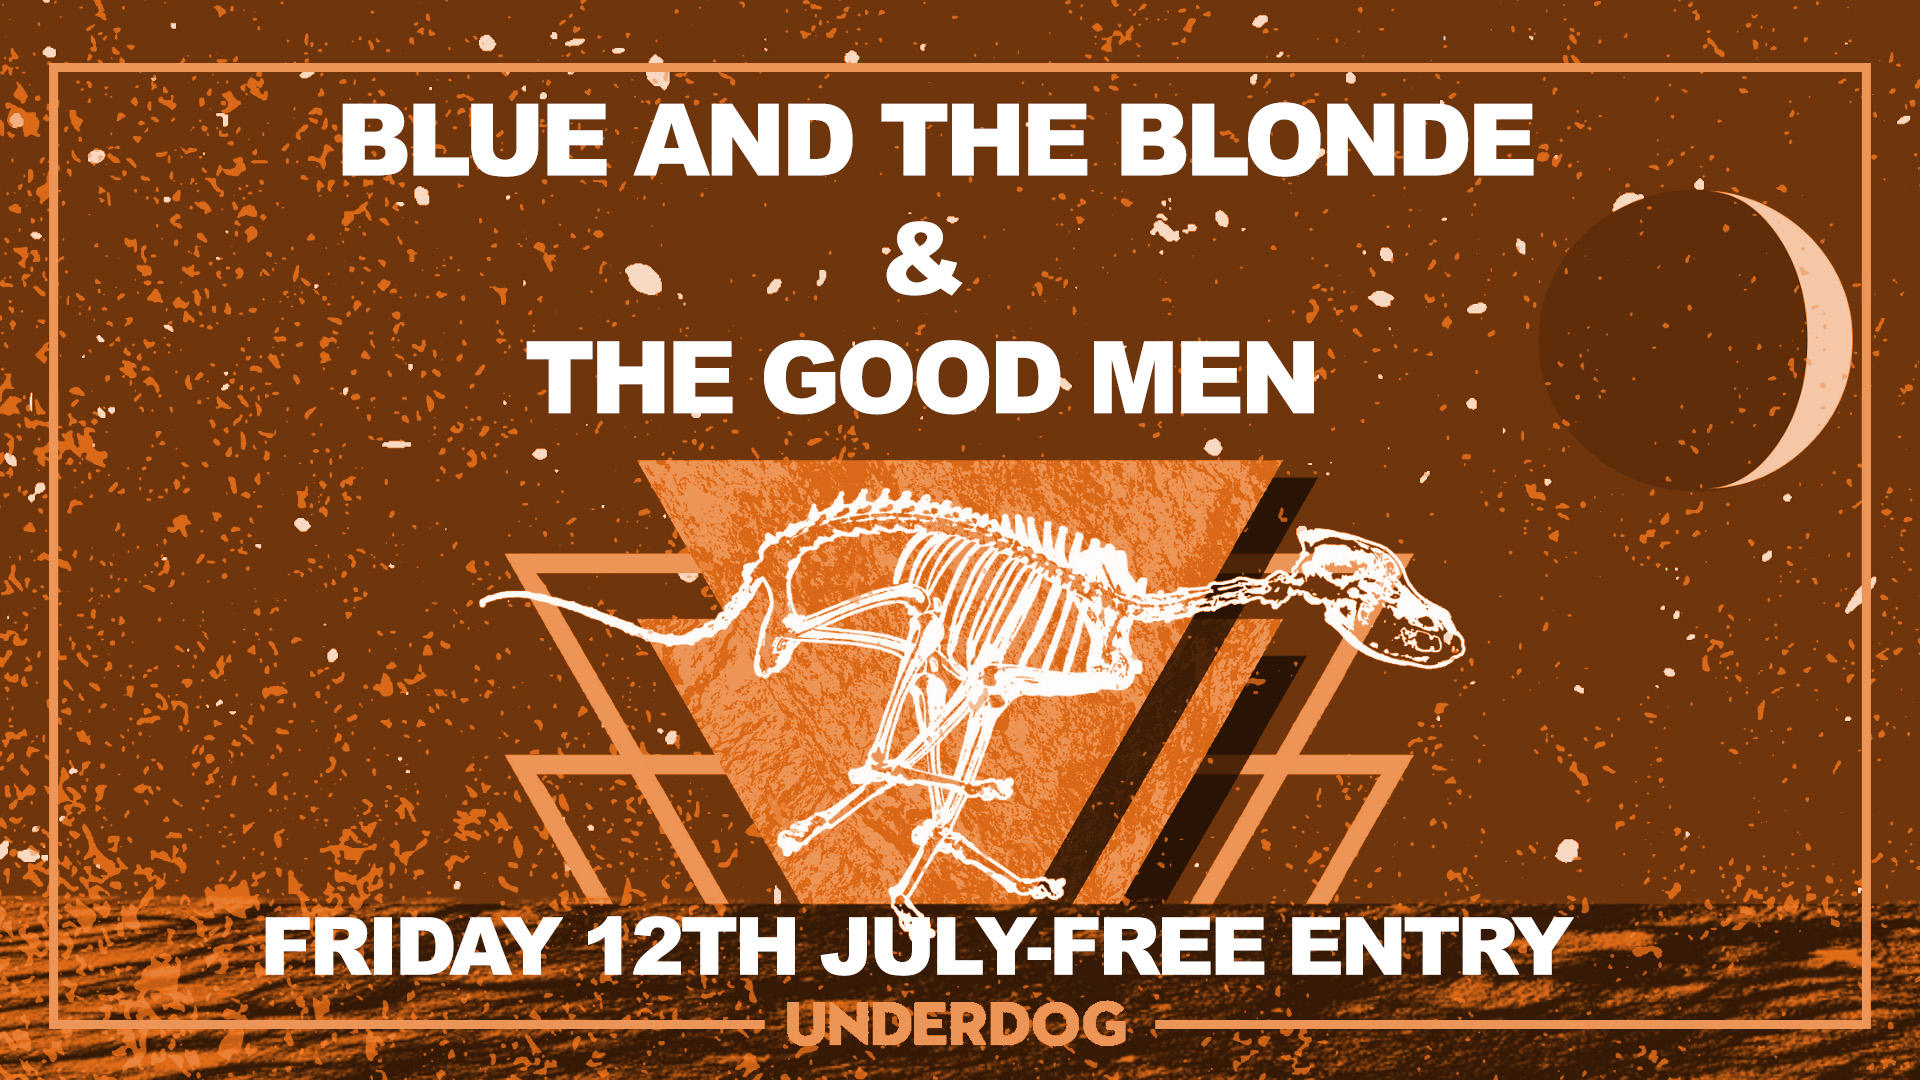 Past Live Music Fri 12th Jul Blue The Blonde With Support From